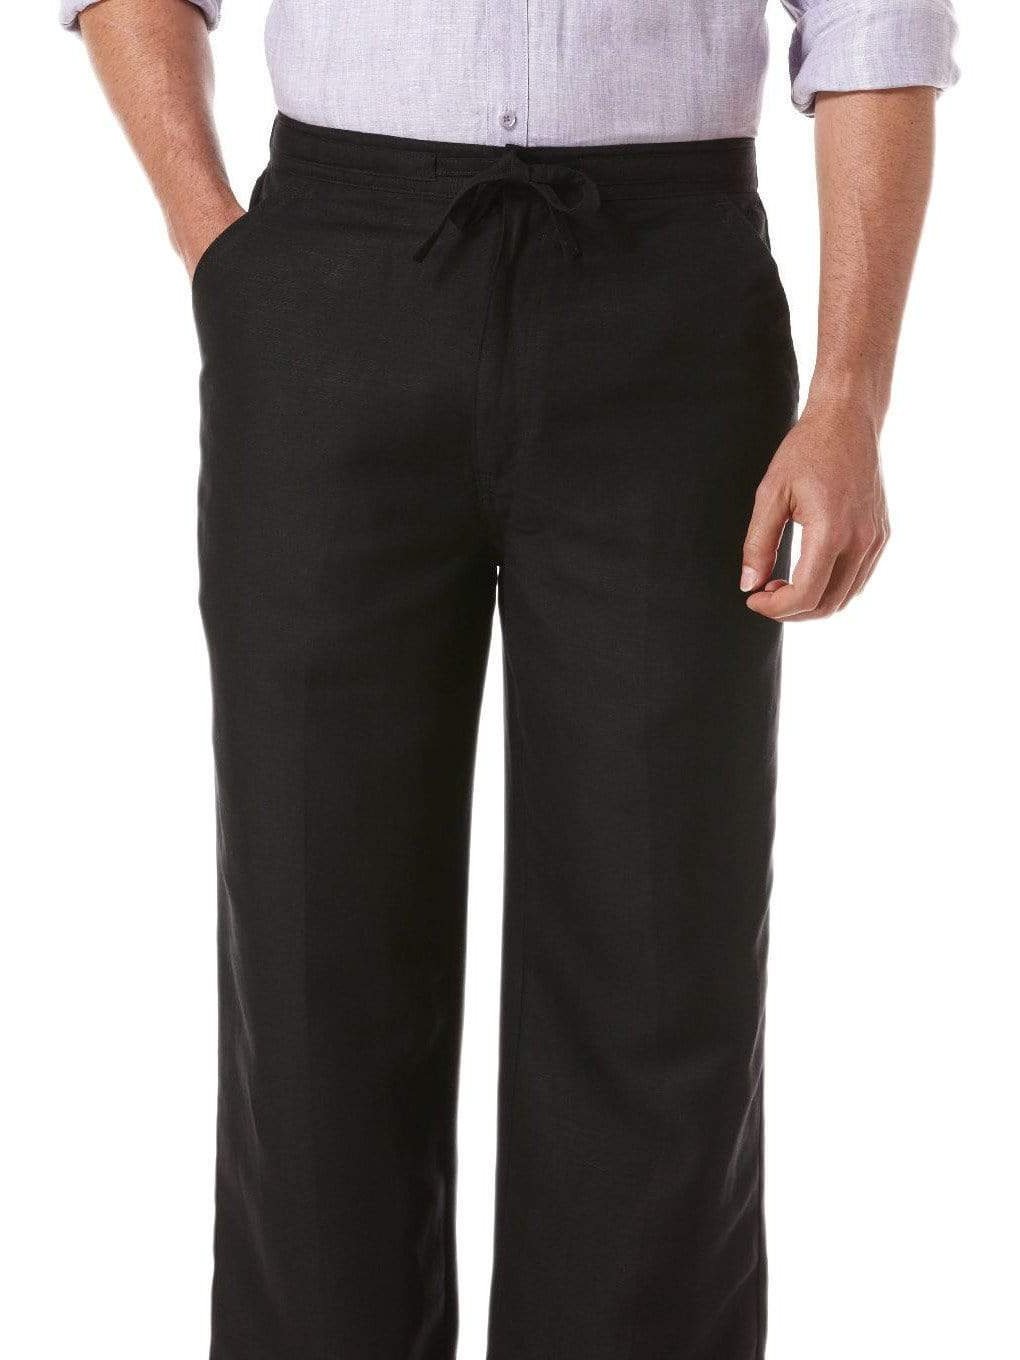 Cubavera Classic Fit Solid Black Washable Casual Pants With Drawstring  Waistband